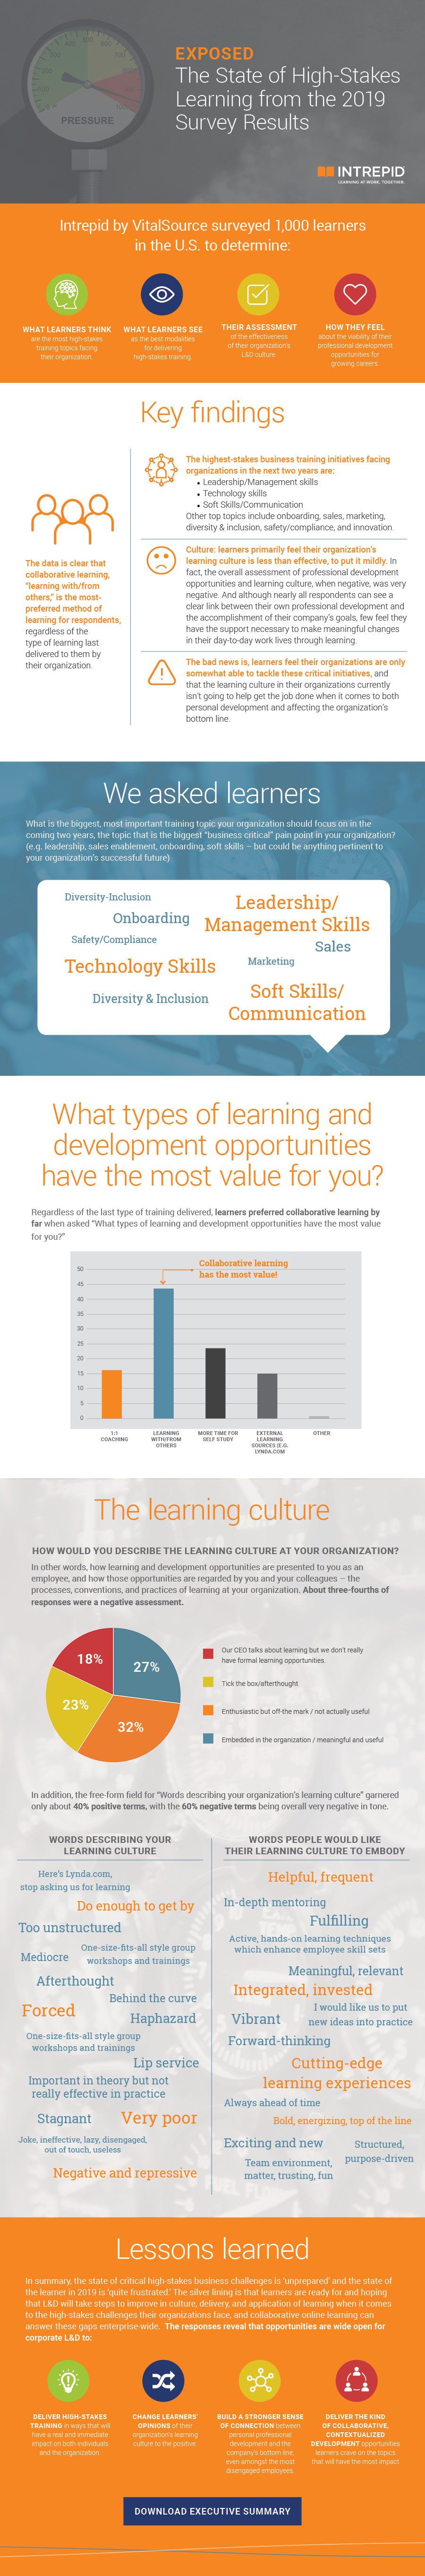 LearningSurveyResults_Infographic_final